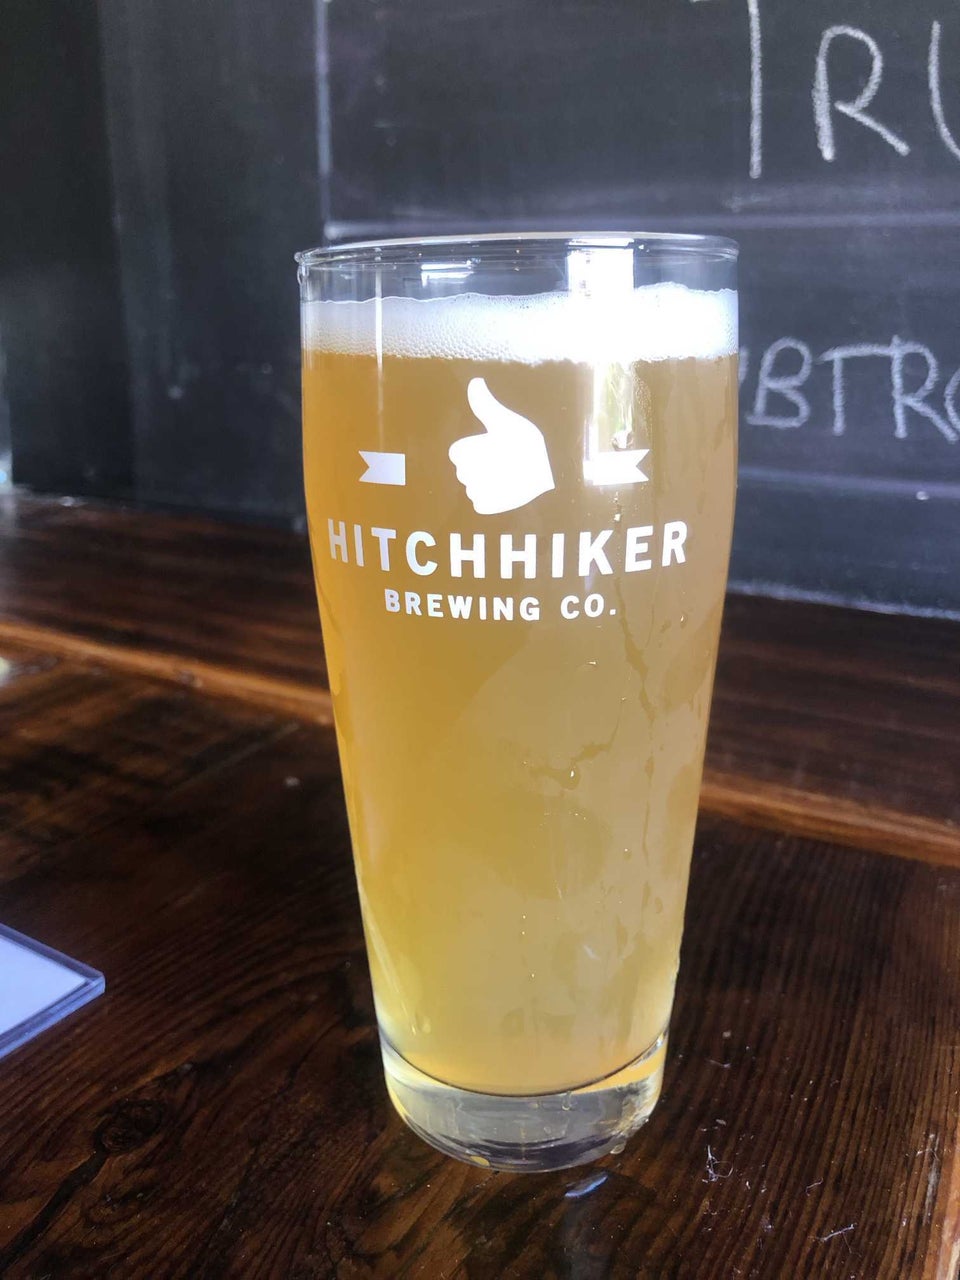 Hitchhiker Brewing - Tap Room